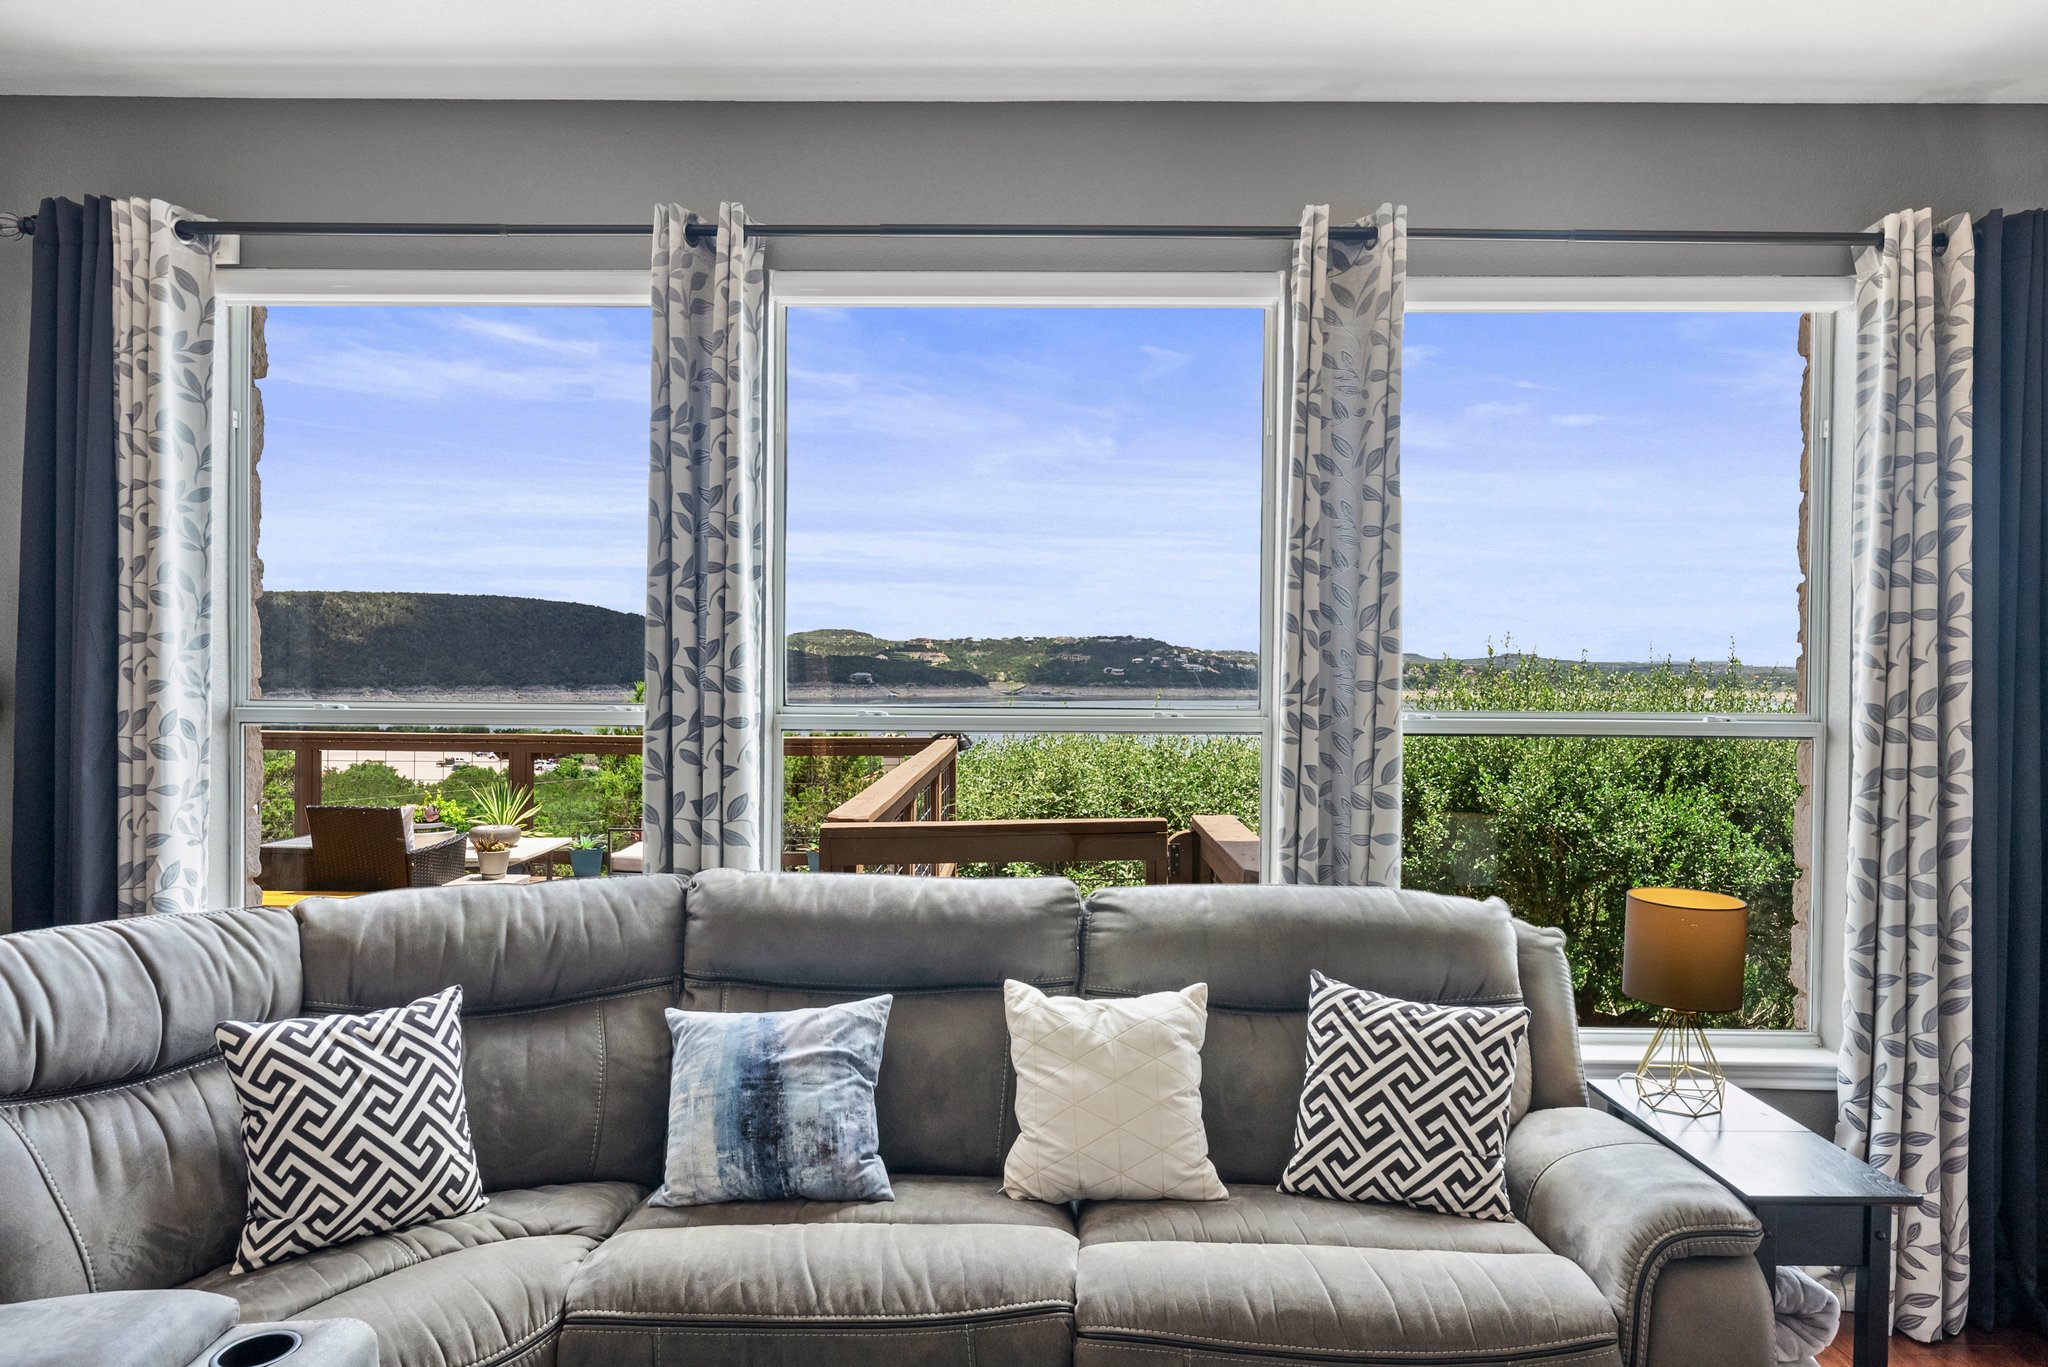 Captivating views from the living room, kitchen and back deck.